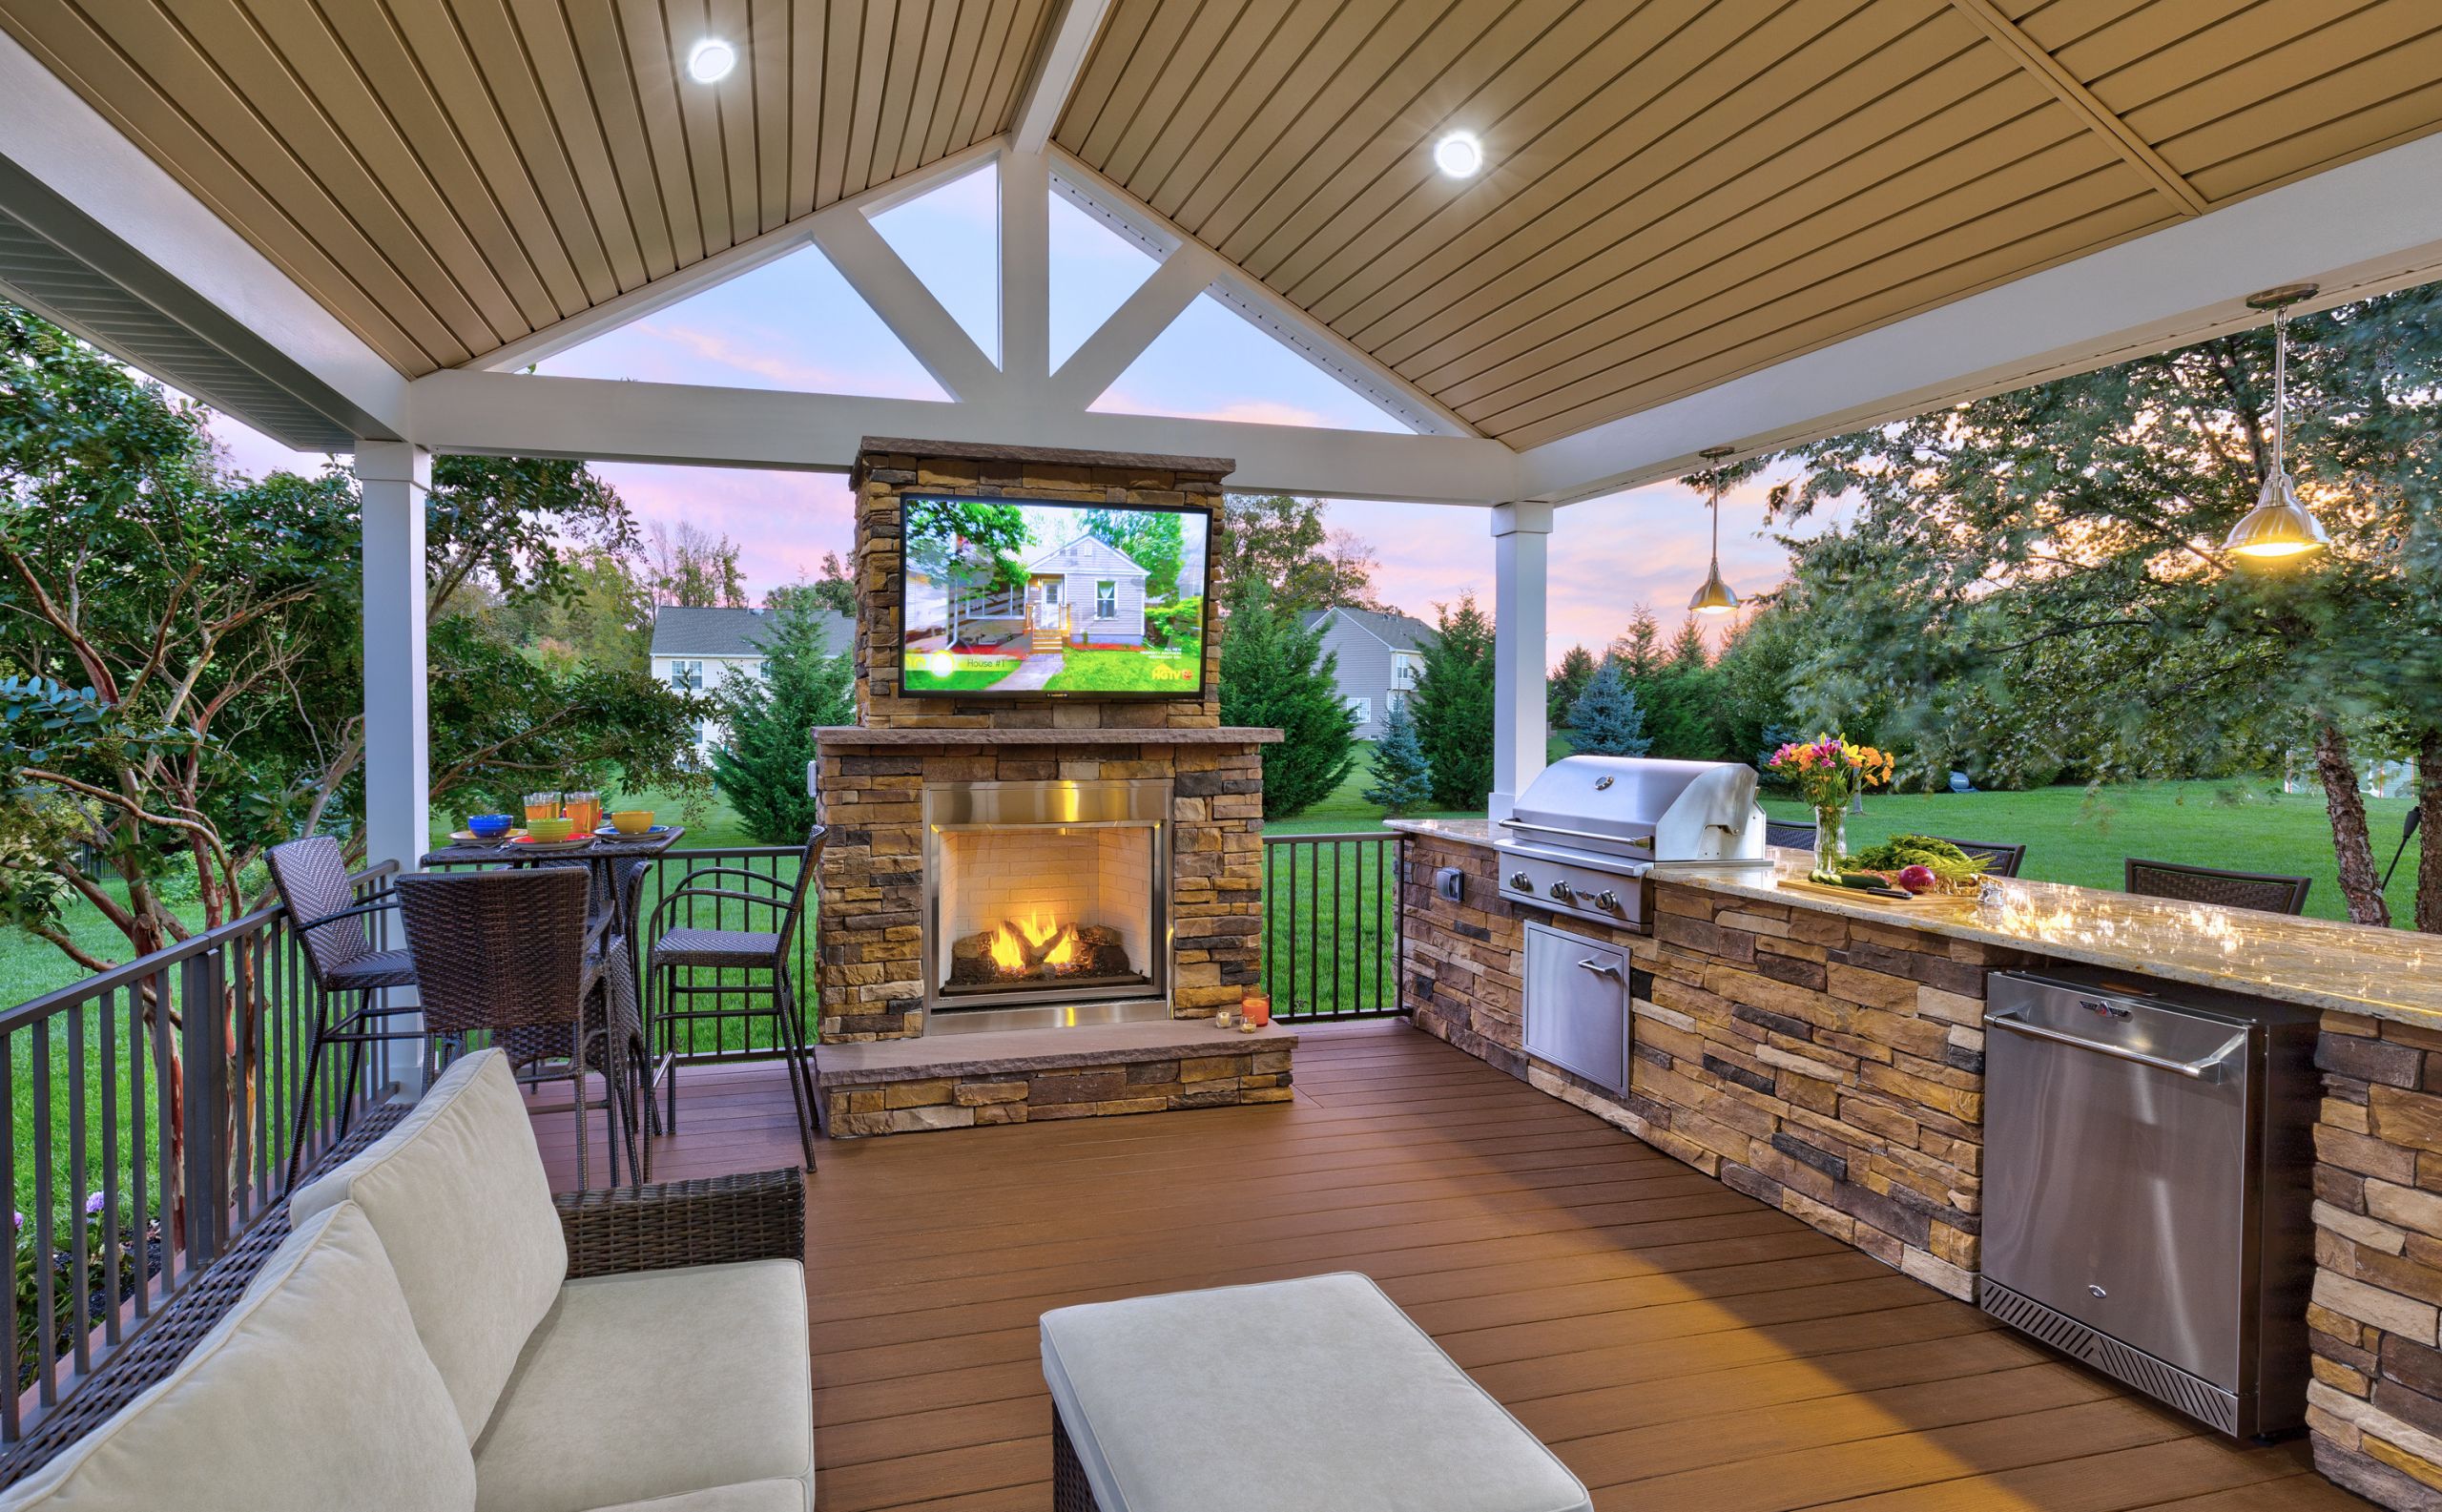 25 Awesome Outdoor Kitchen Designs with Fireplace - Home Decoration and ...